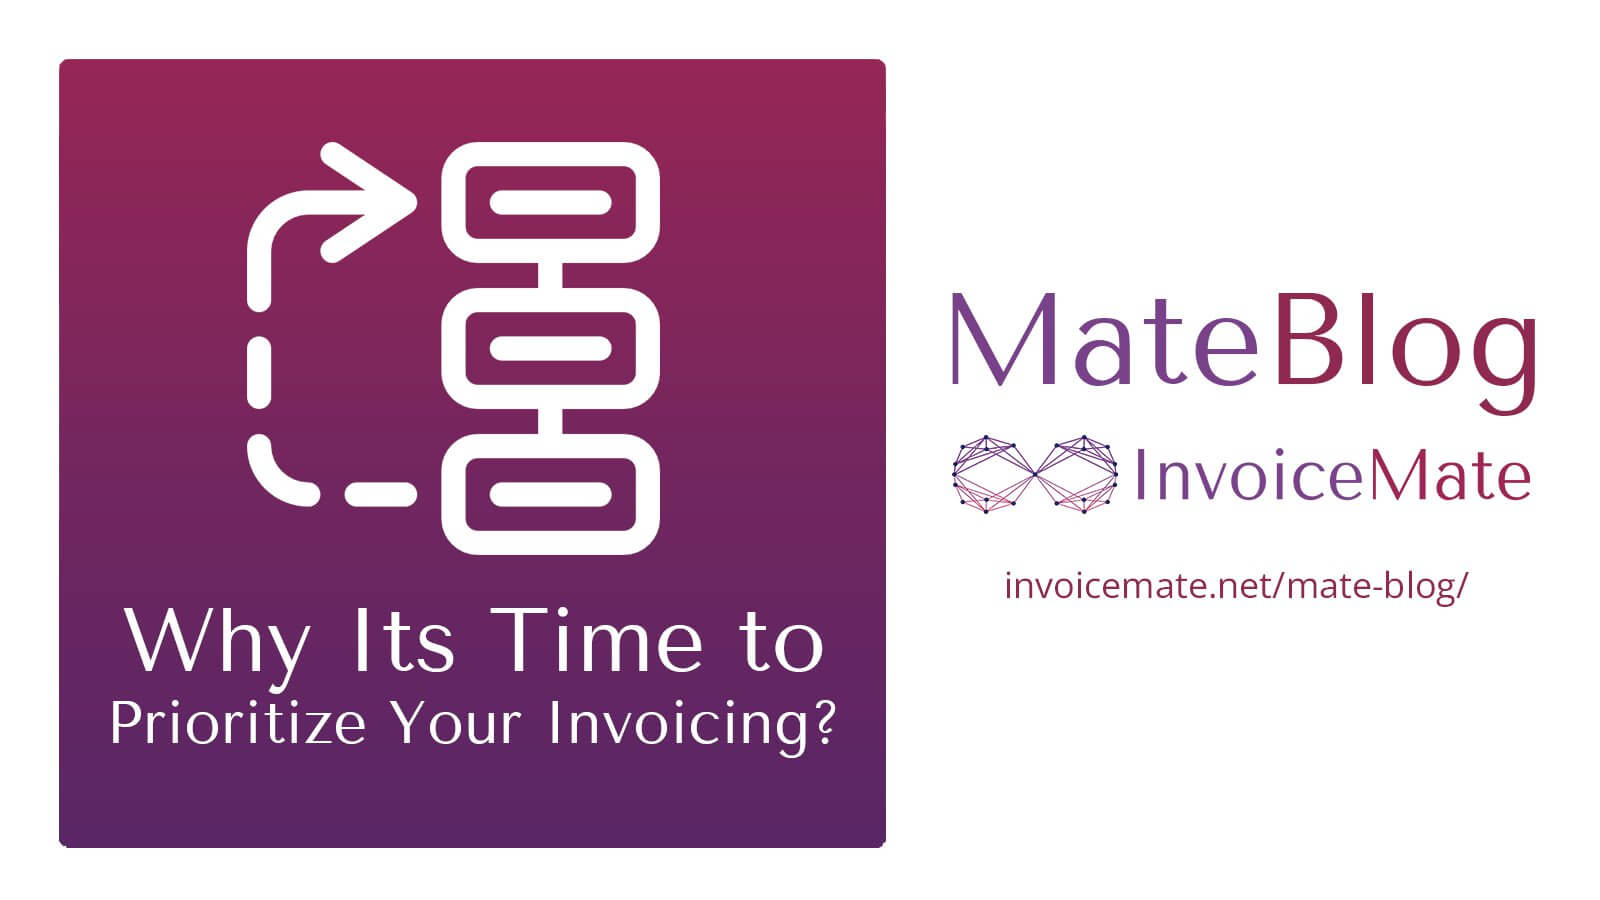 Why Its Time To Prioritize Your Invoicing